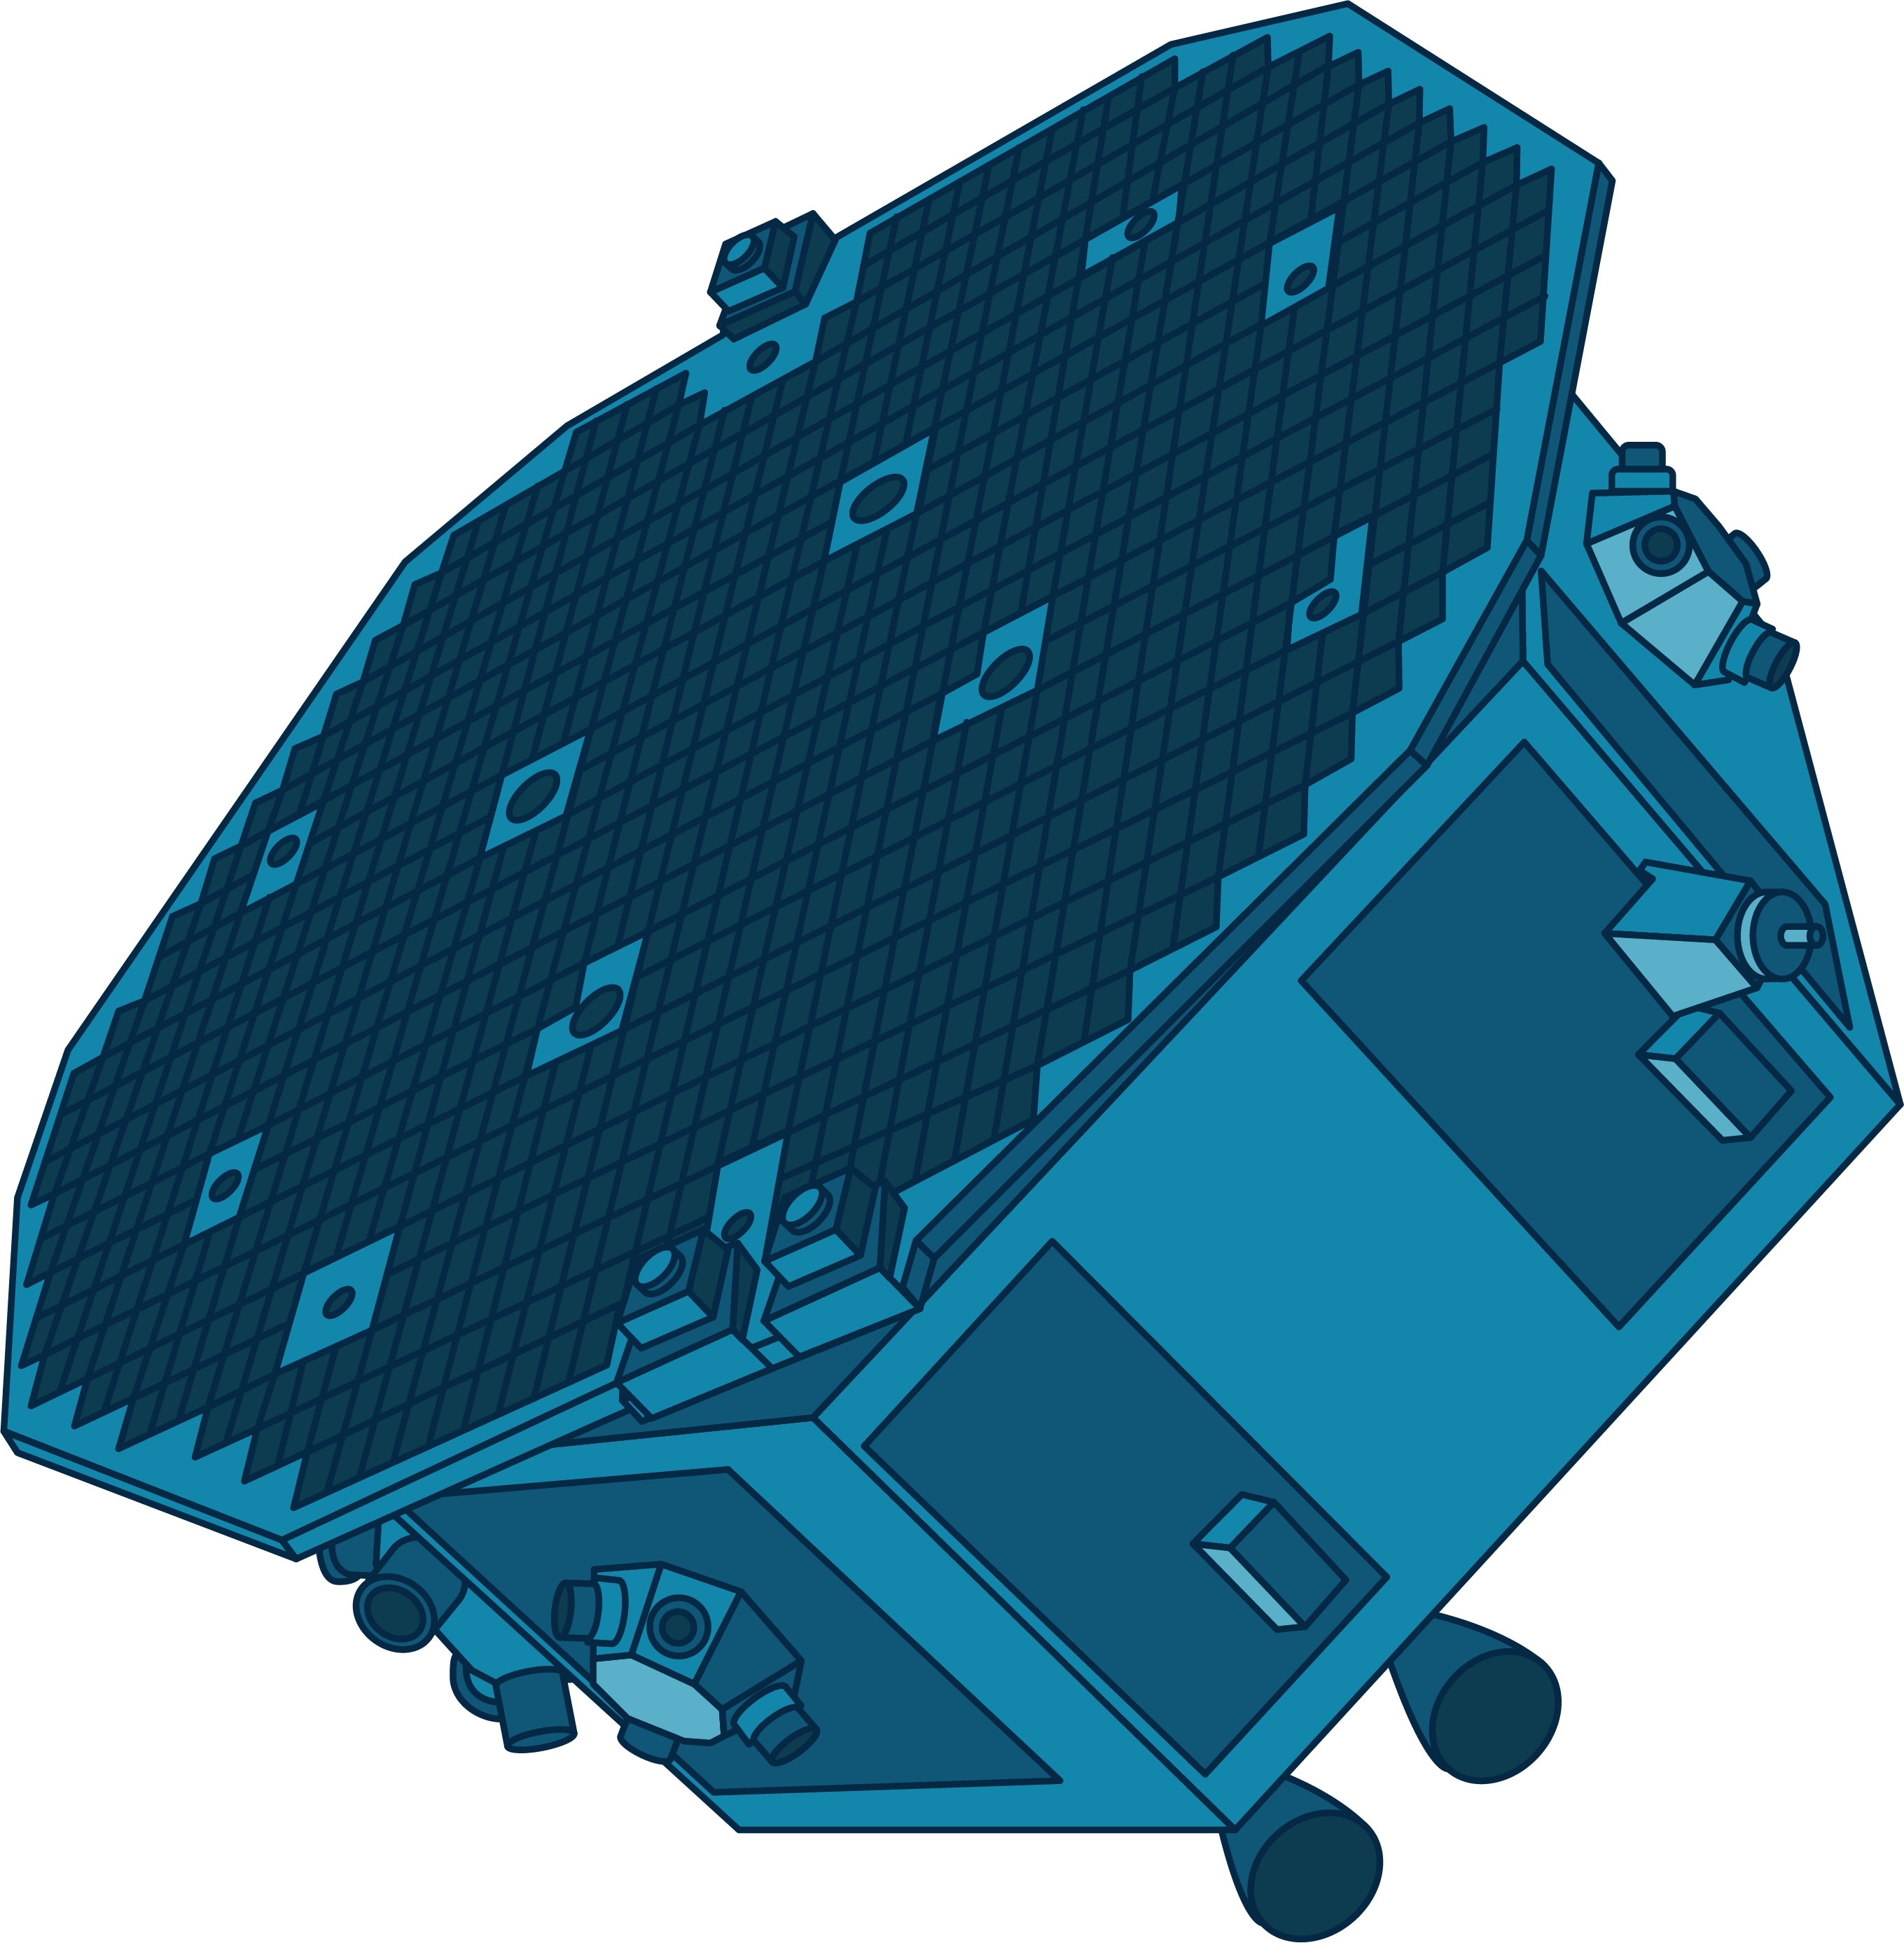 This illustration shows ESA's LISA Pathfinder spacecraft in shades of blue. The craft has an octagonal shape with a relatively flat "face" with smaller components found around the sides of the spacecraft.